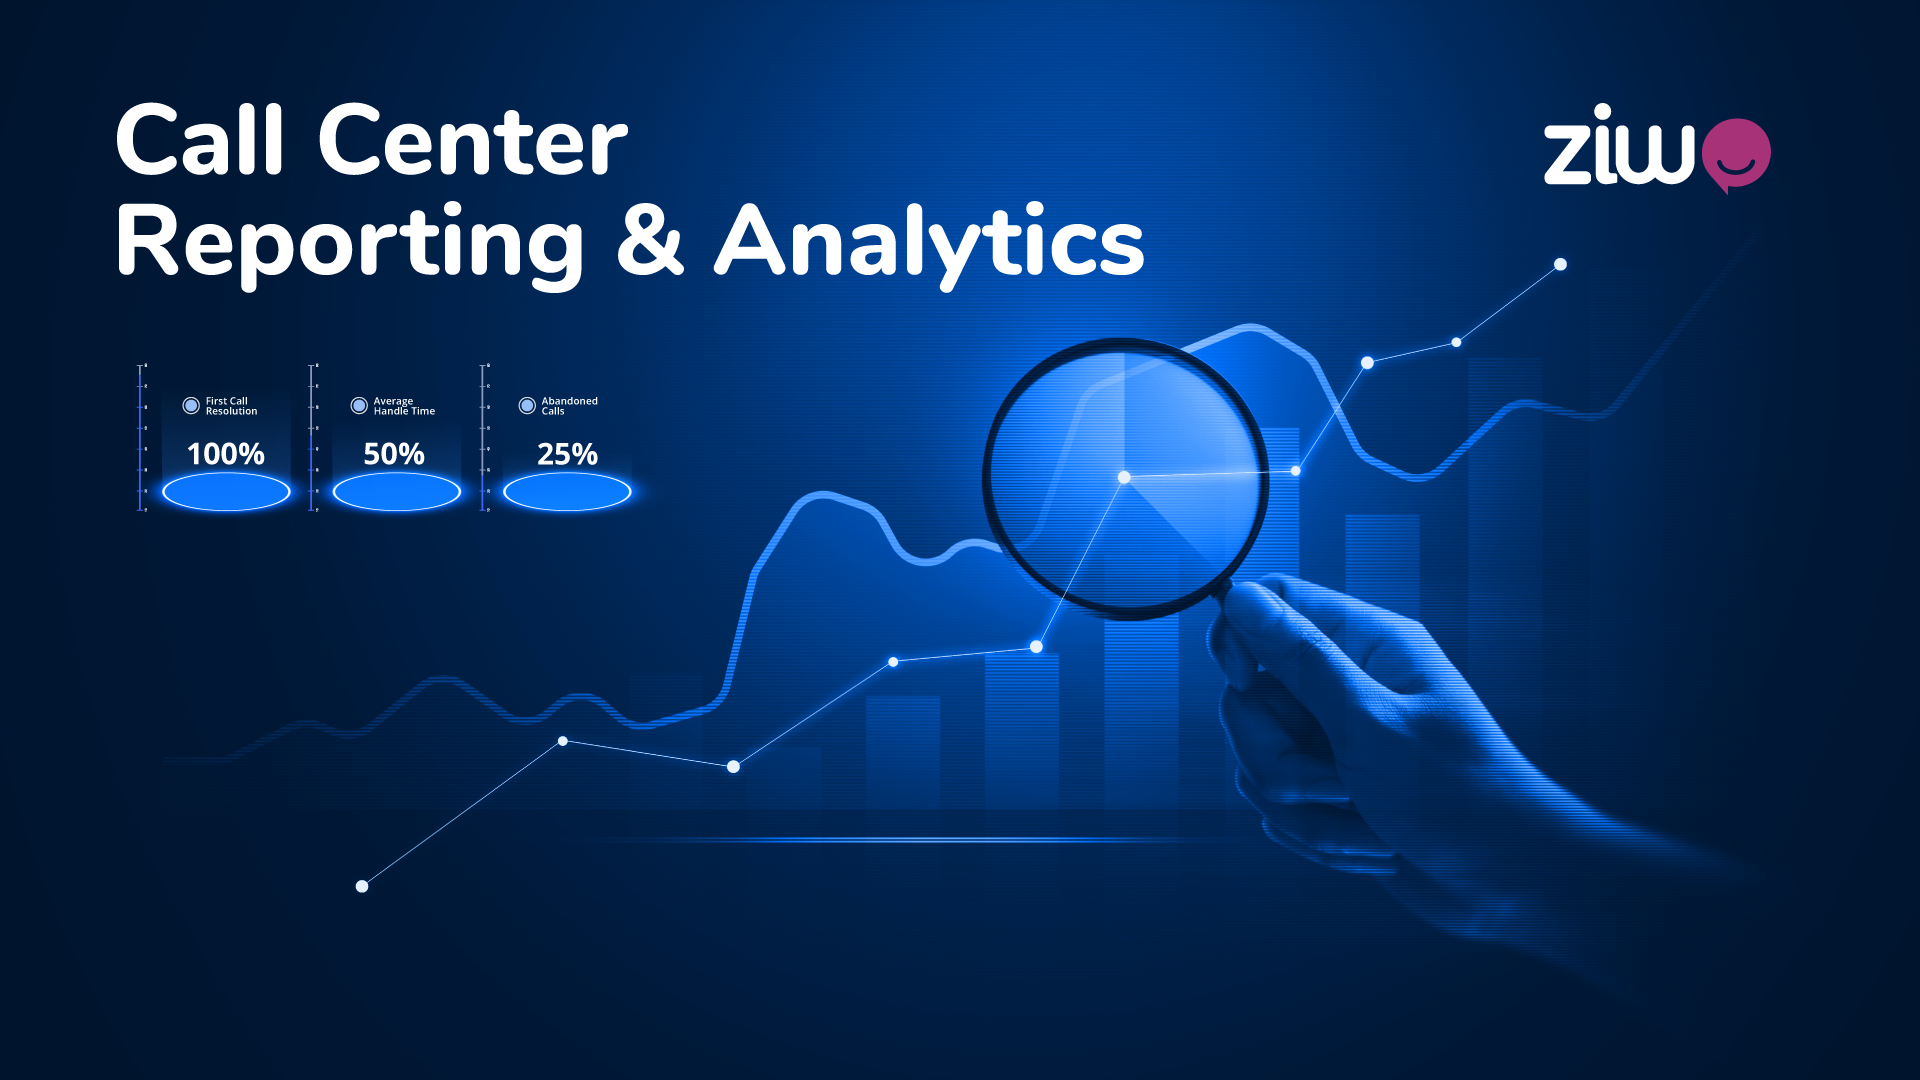 Call center reporting & analytics: A visual representation of data and statistics related to call center operations and performance